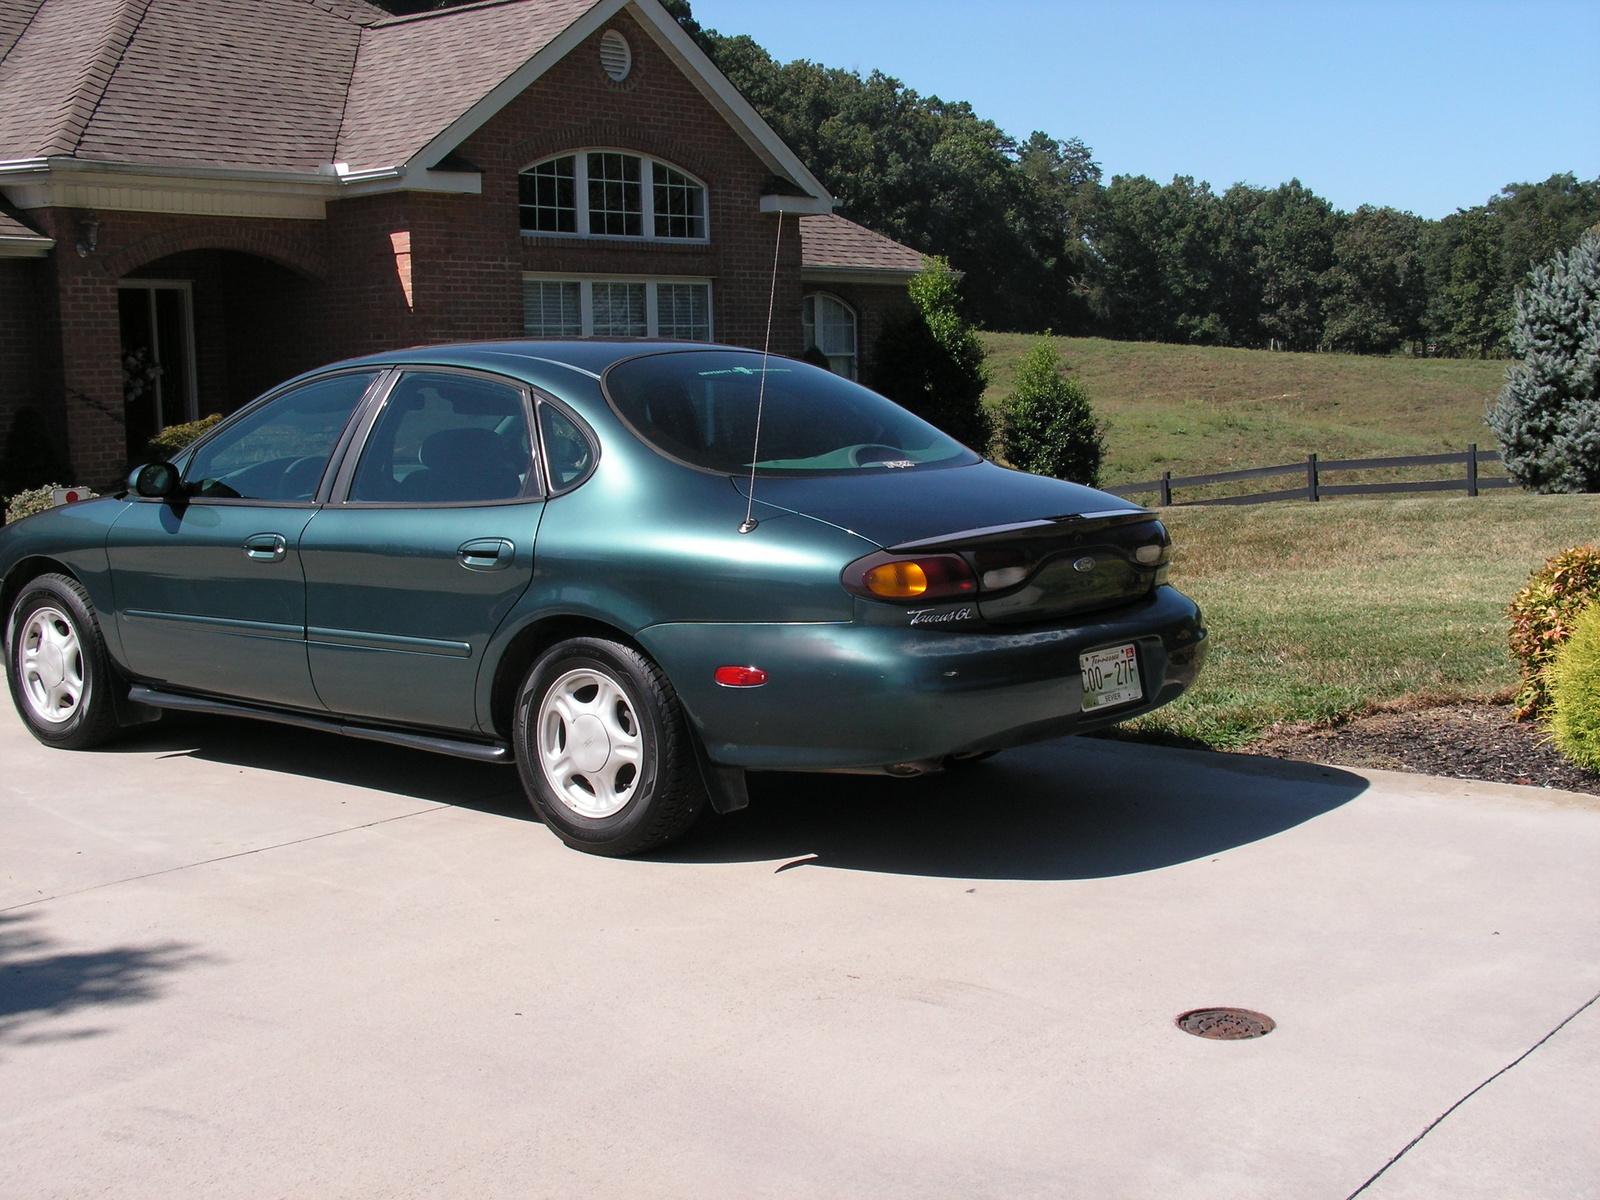 1997 Ford taurus wagon gl specifications #1